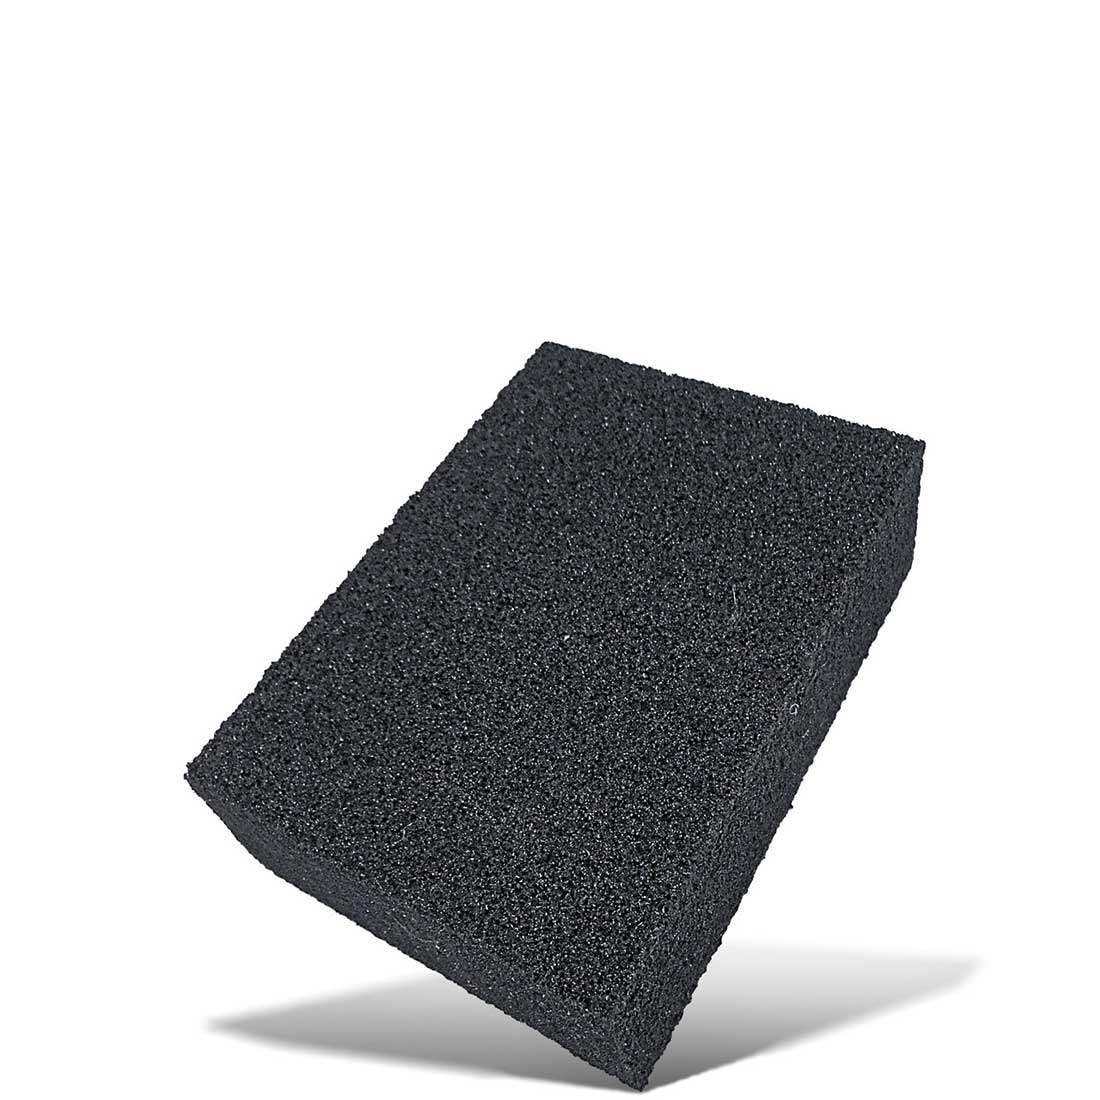 MENZER sanding blocks for hand sanders, 100 x 70 x 25 mm / silicon carbide